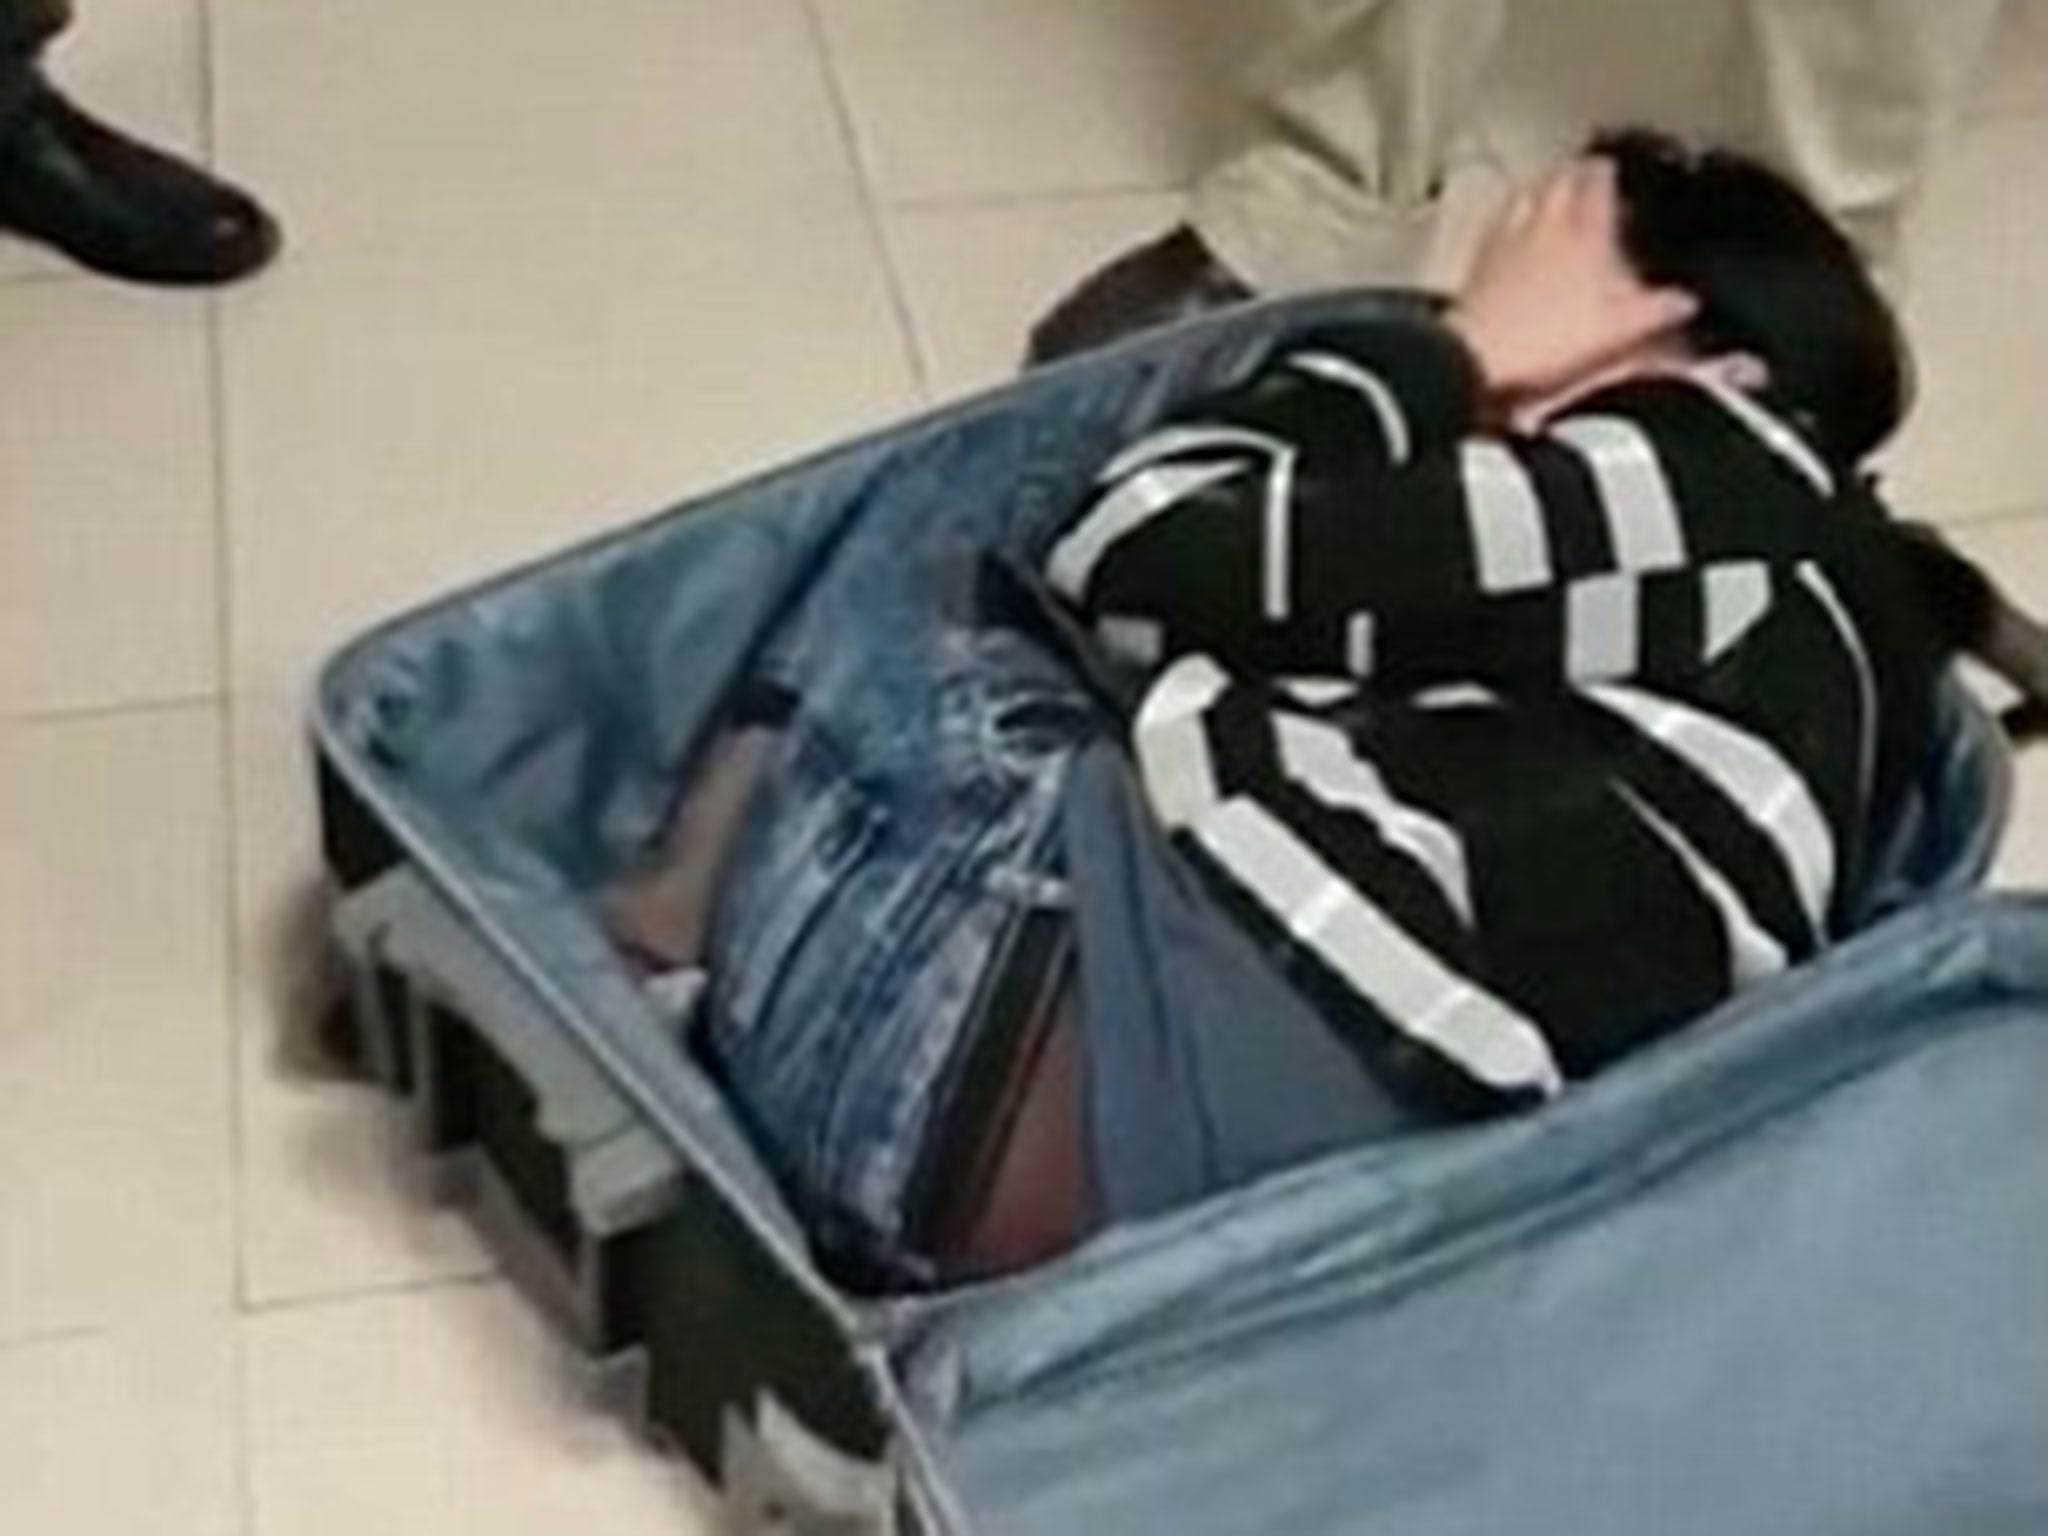 The woman was found curled up inside the suitcase